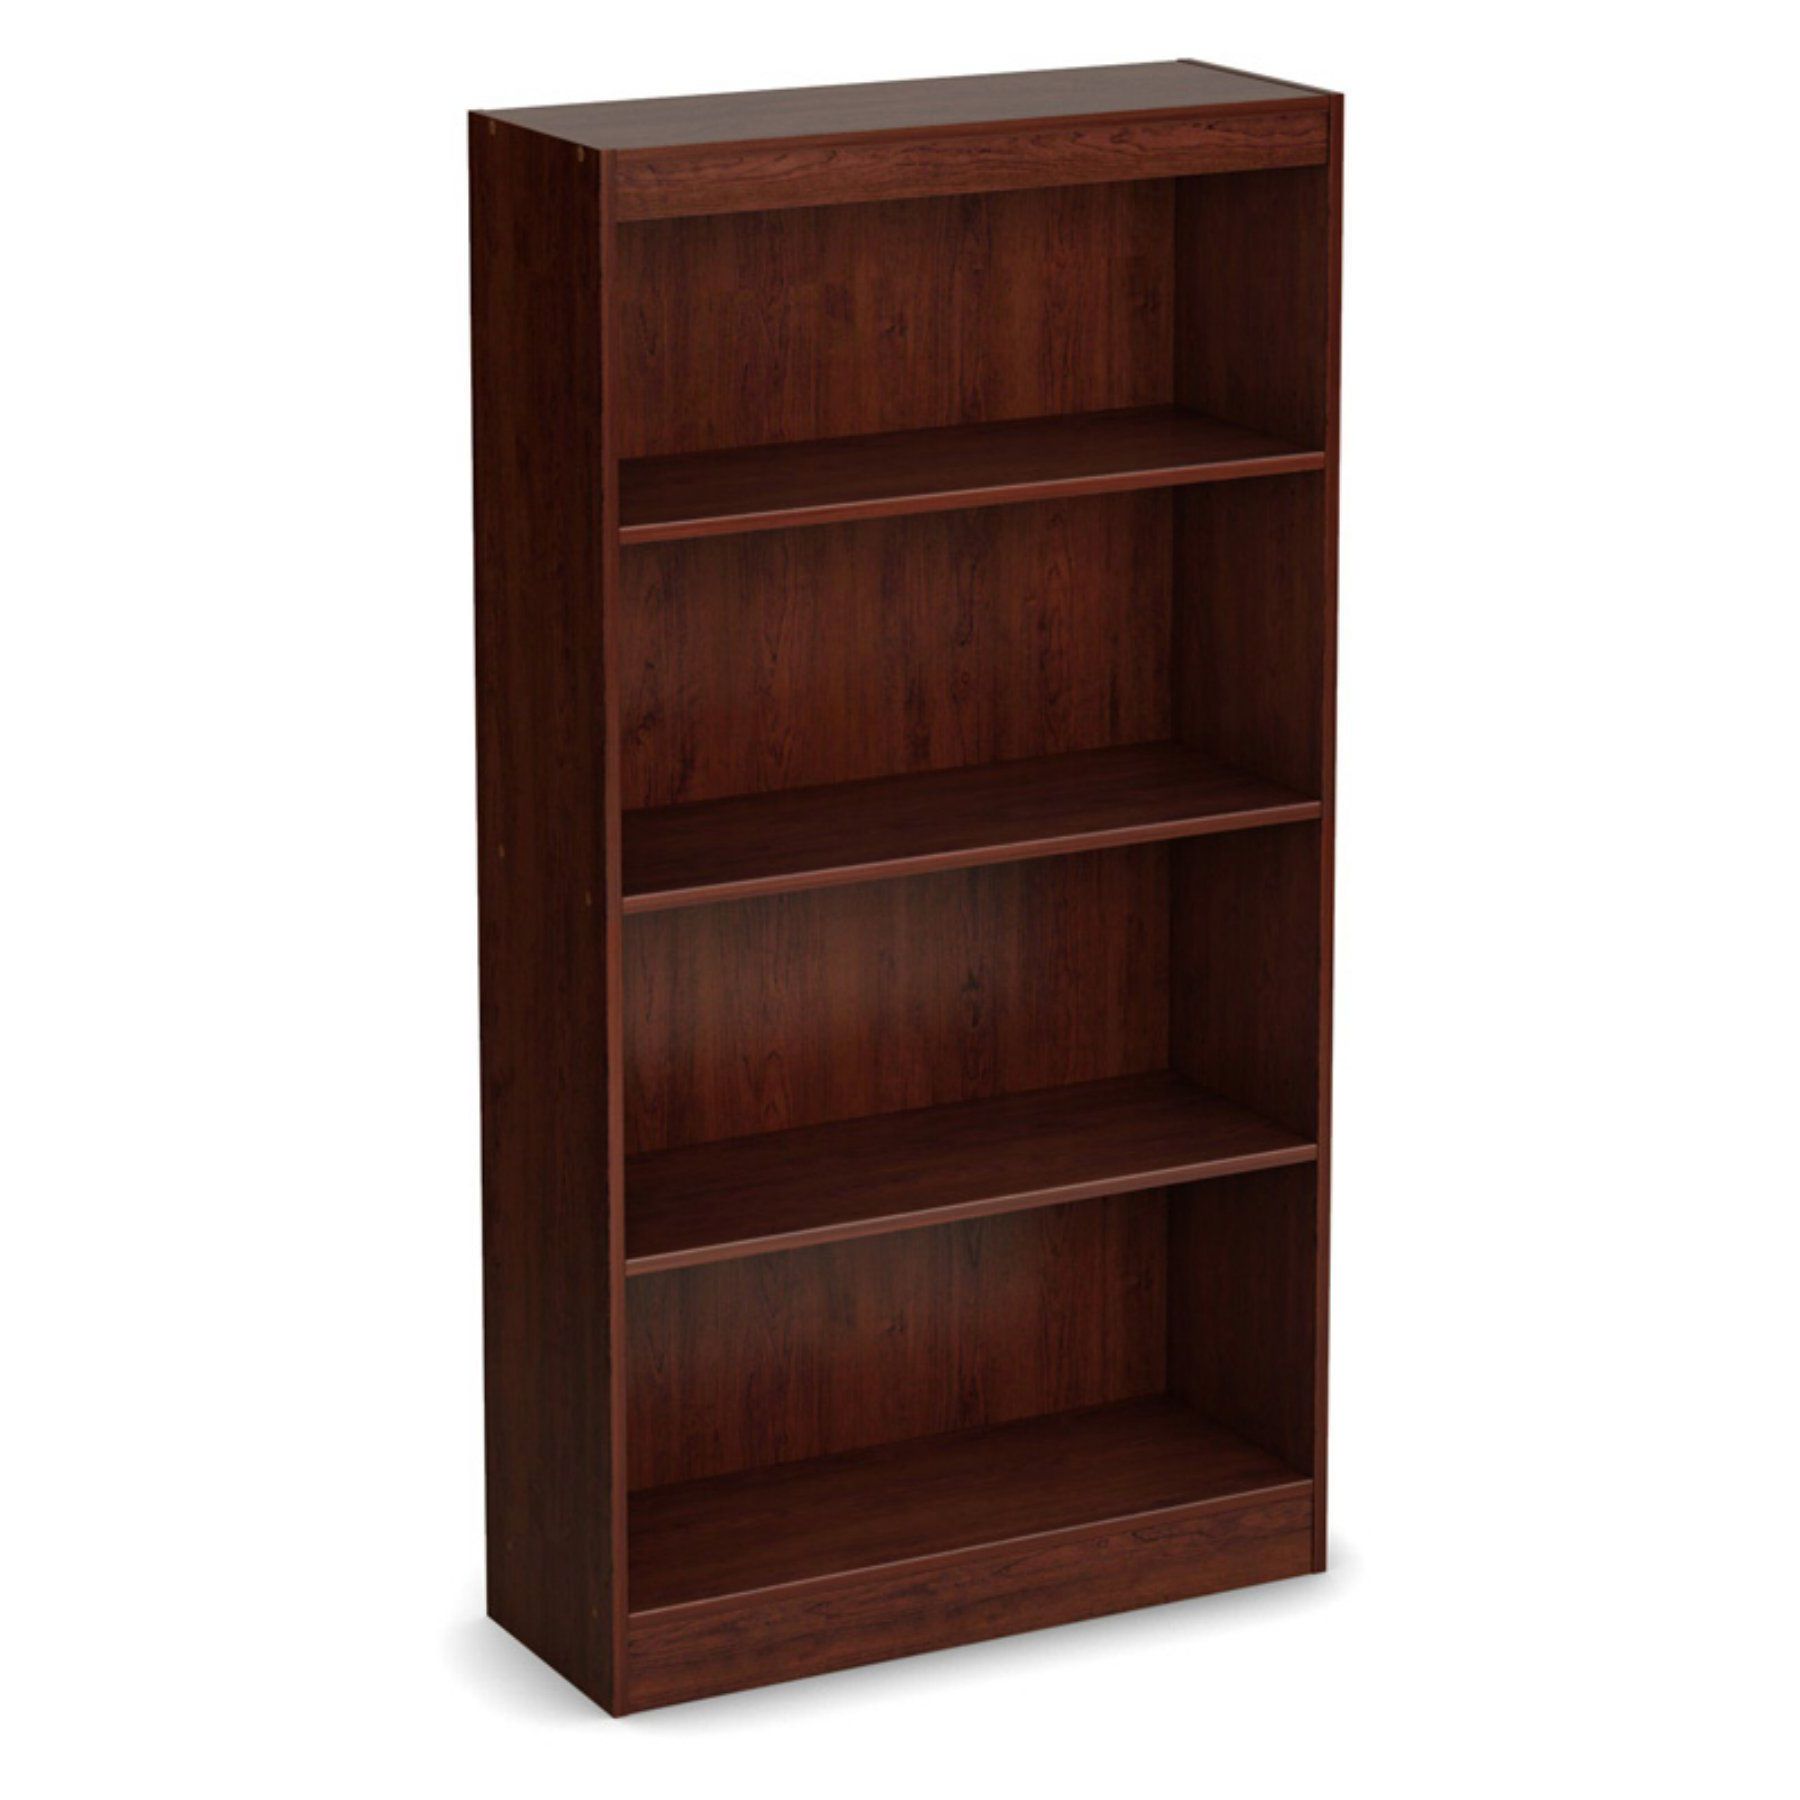 South Shore Axess Collection Royal Cherry Bookcase With Regard To Fashionable Axess Standard Bookcases (View 10 of 20)